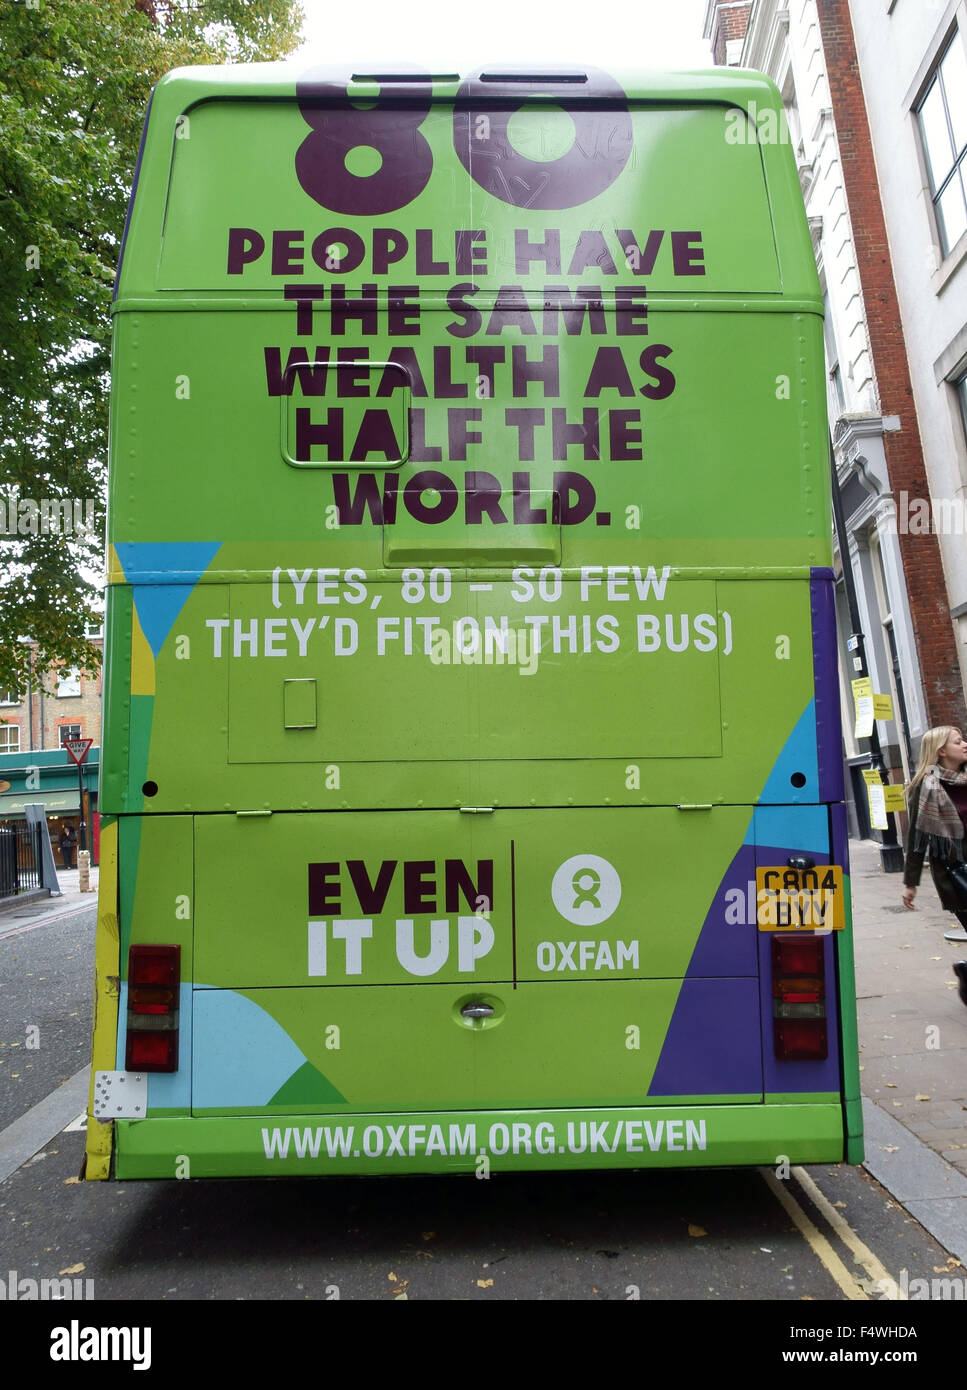 Oxfam 'Even It Up' bus campaigns against global inequality of wealth, London Stock Photo